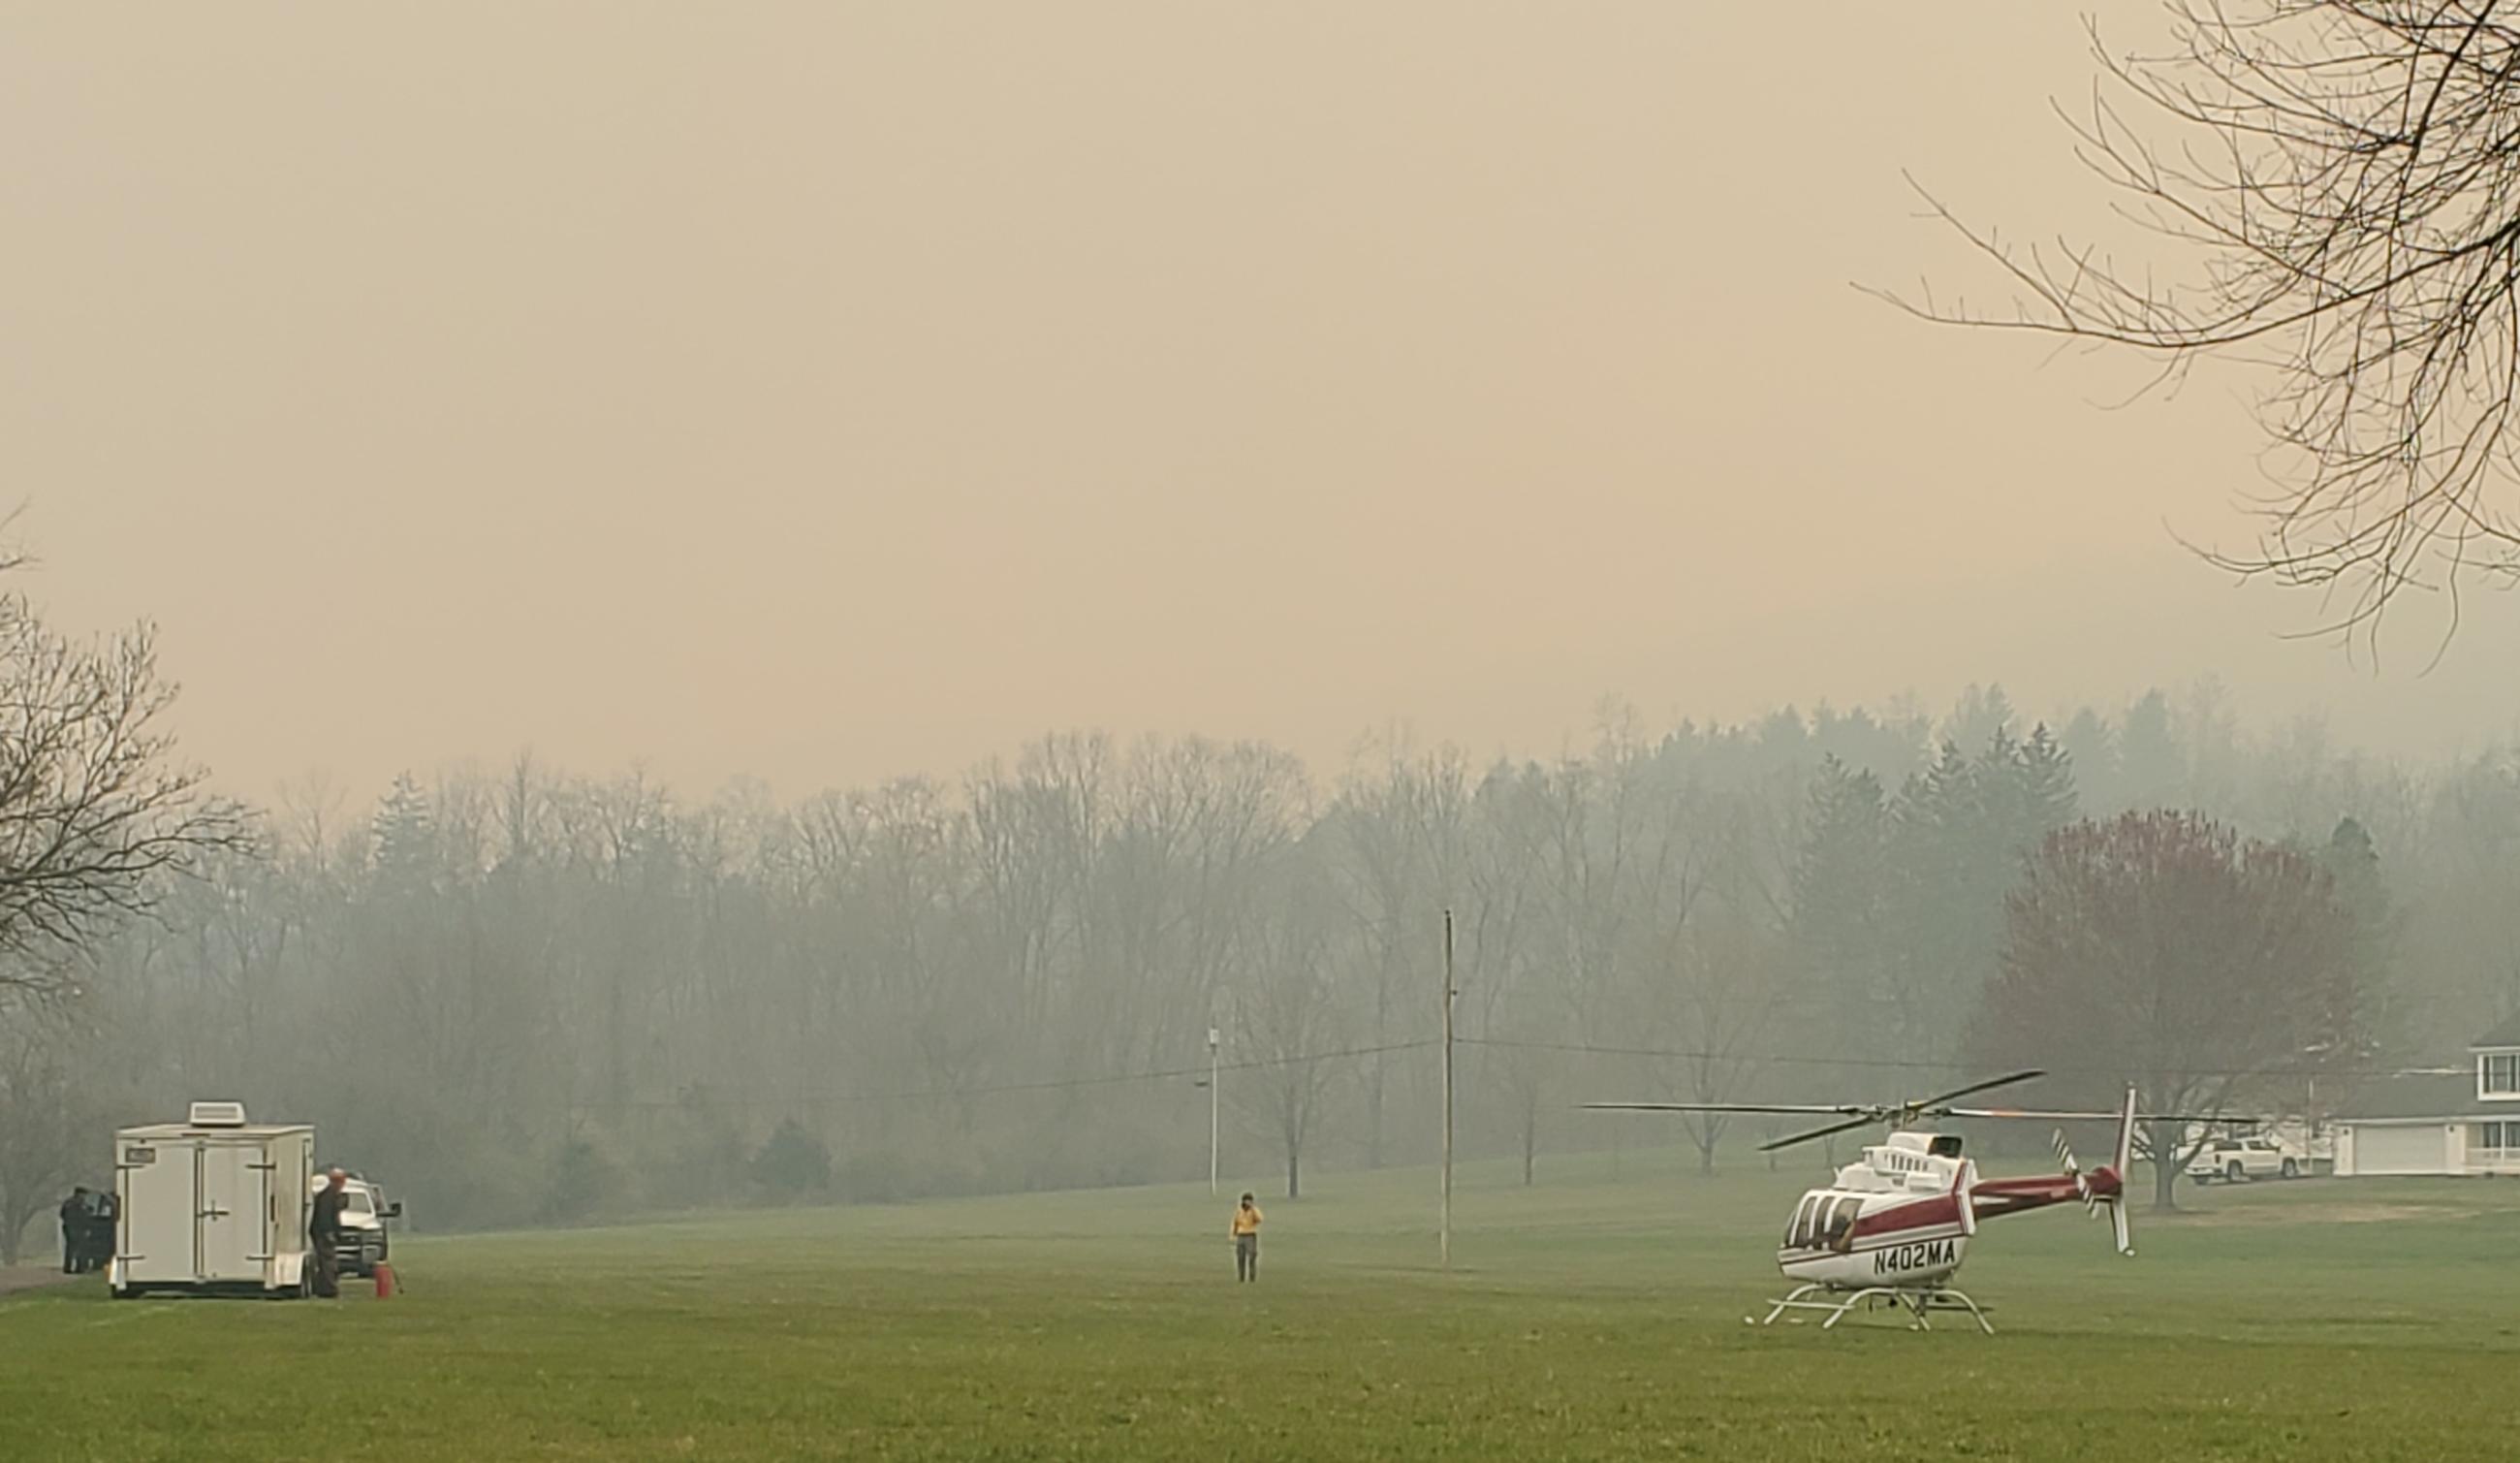 Helicopter and support vehicles on green grass under smoky sky